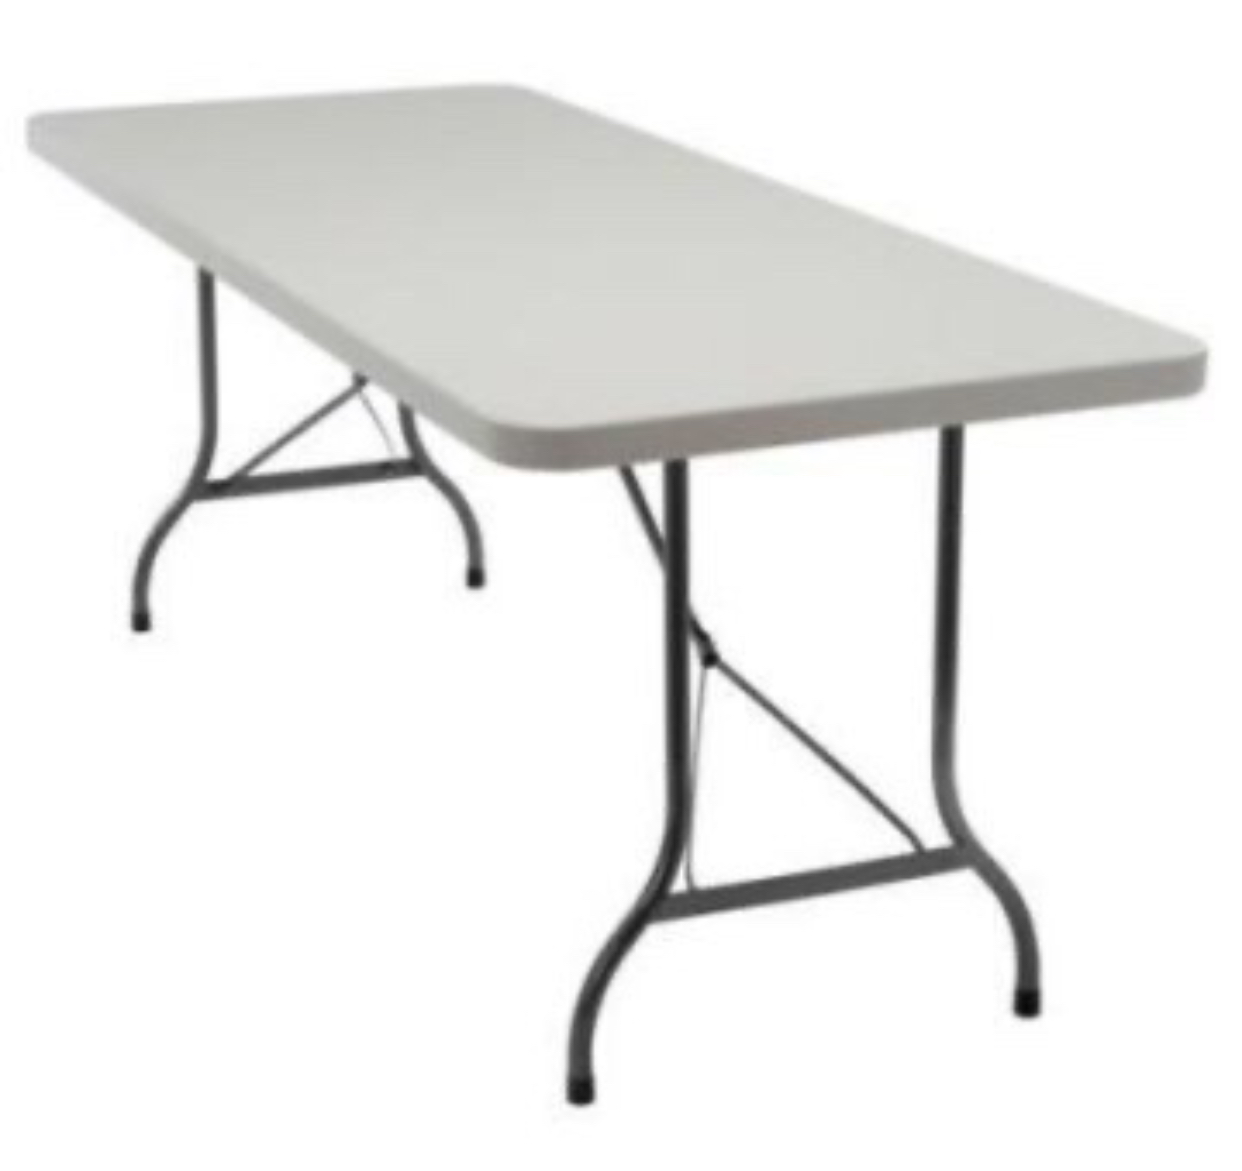 White 8 ft x 2ft 6 inch folding trestle white blow moulded table